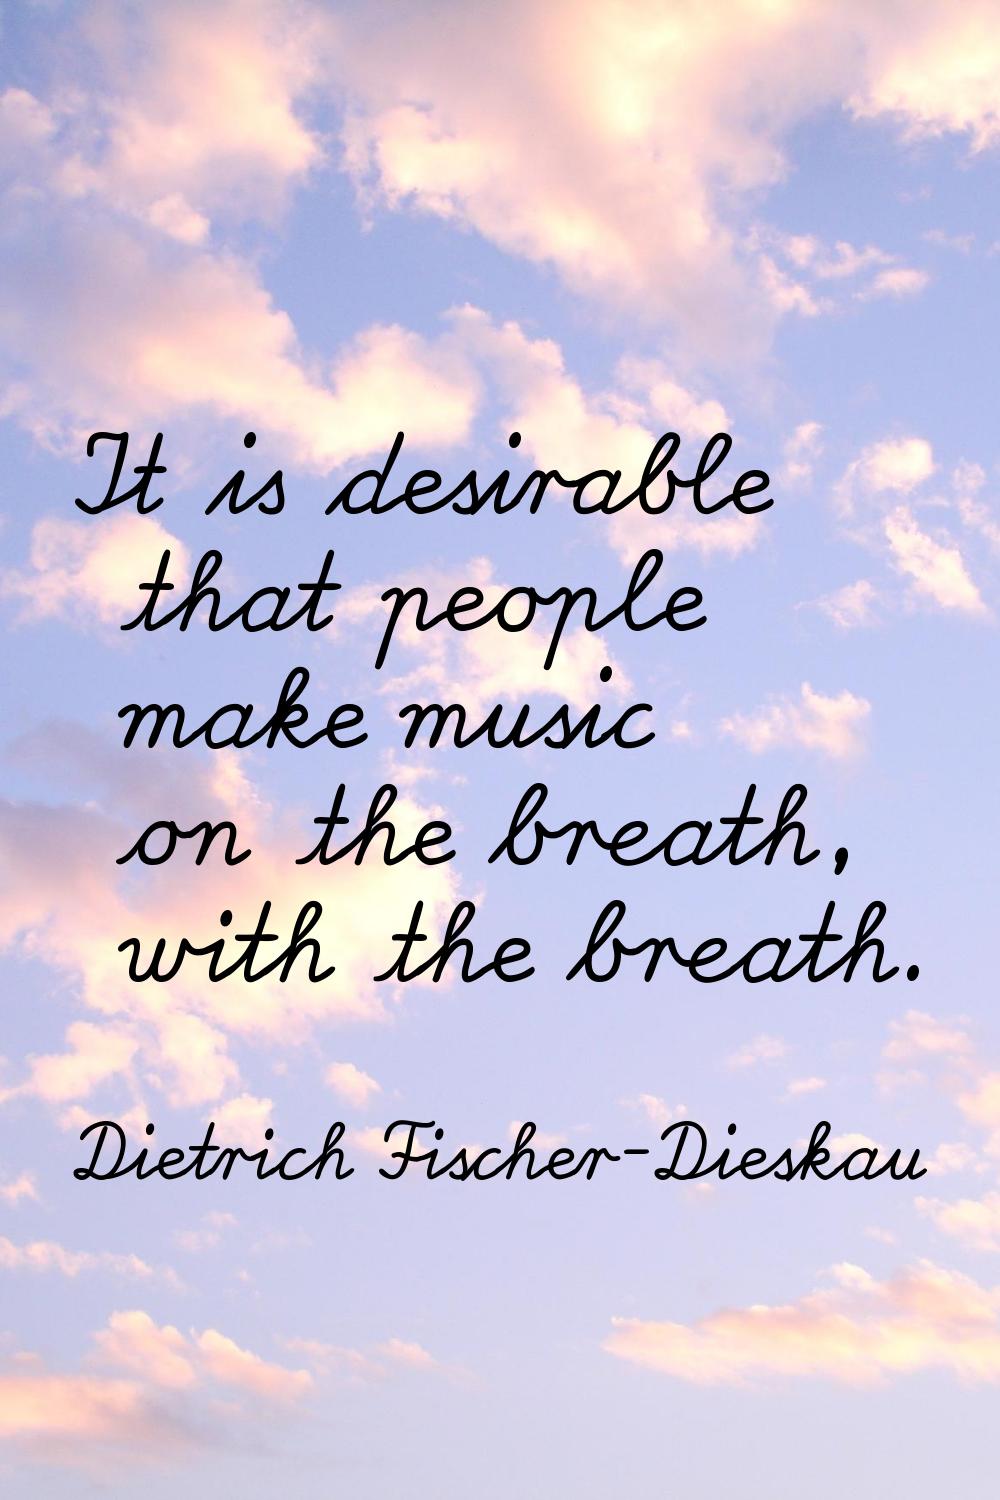 It is desirable that people make music on the breath, with the breath.